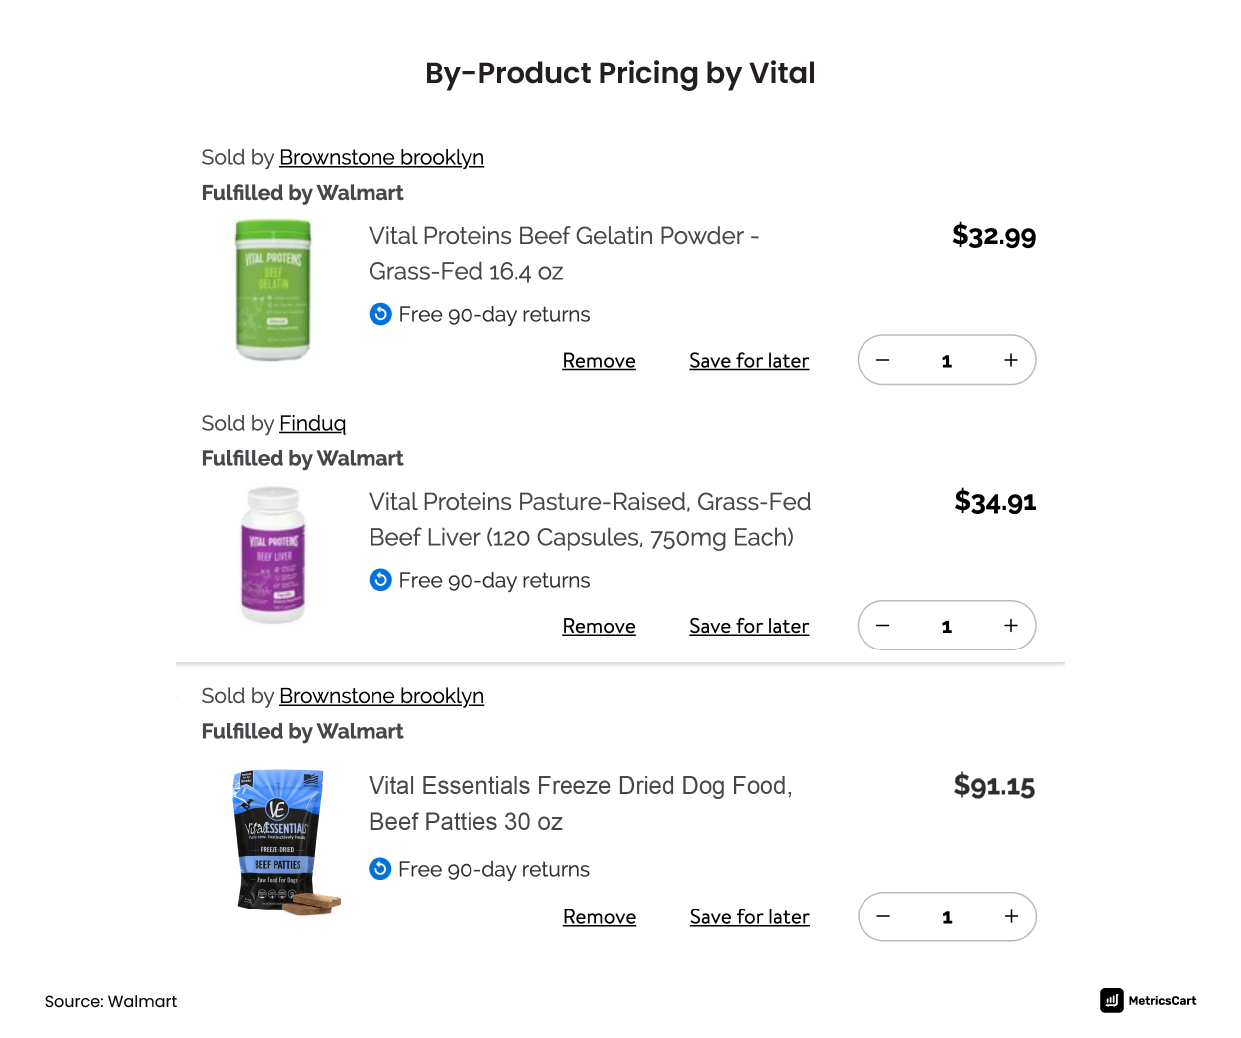 Vital is a byproduct pricing example on Walmart